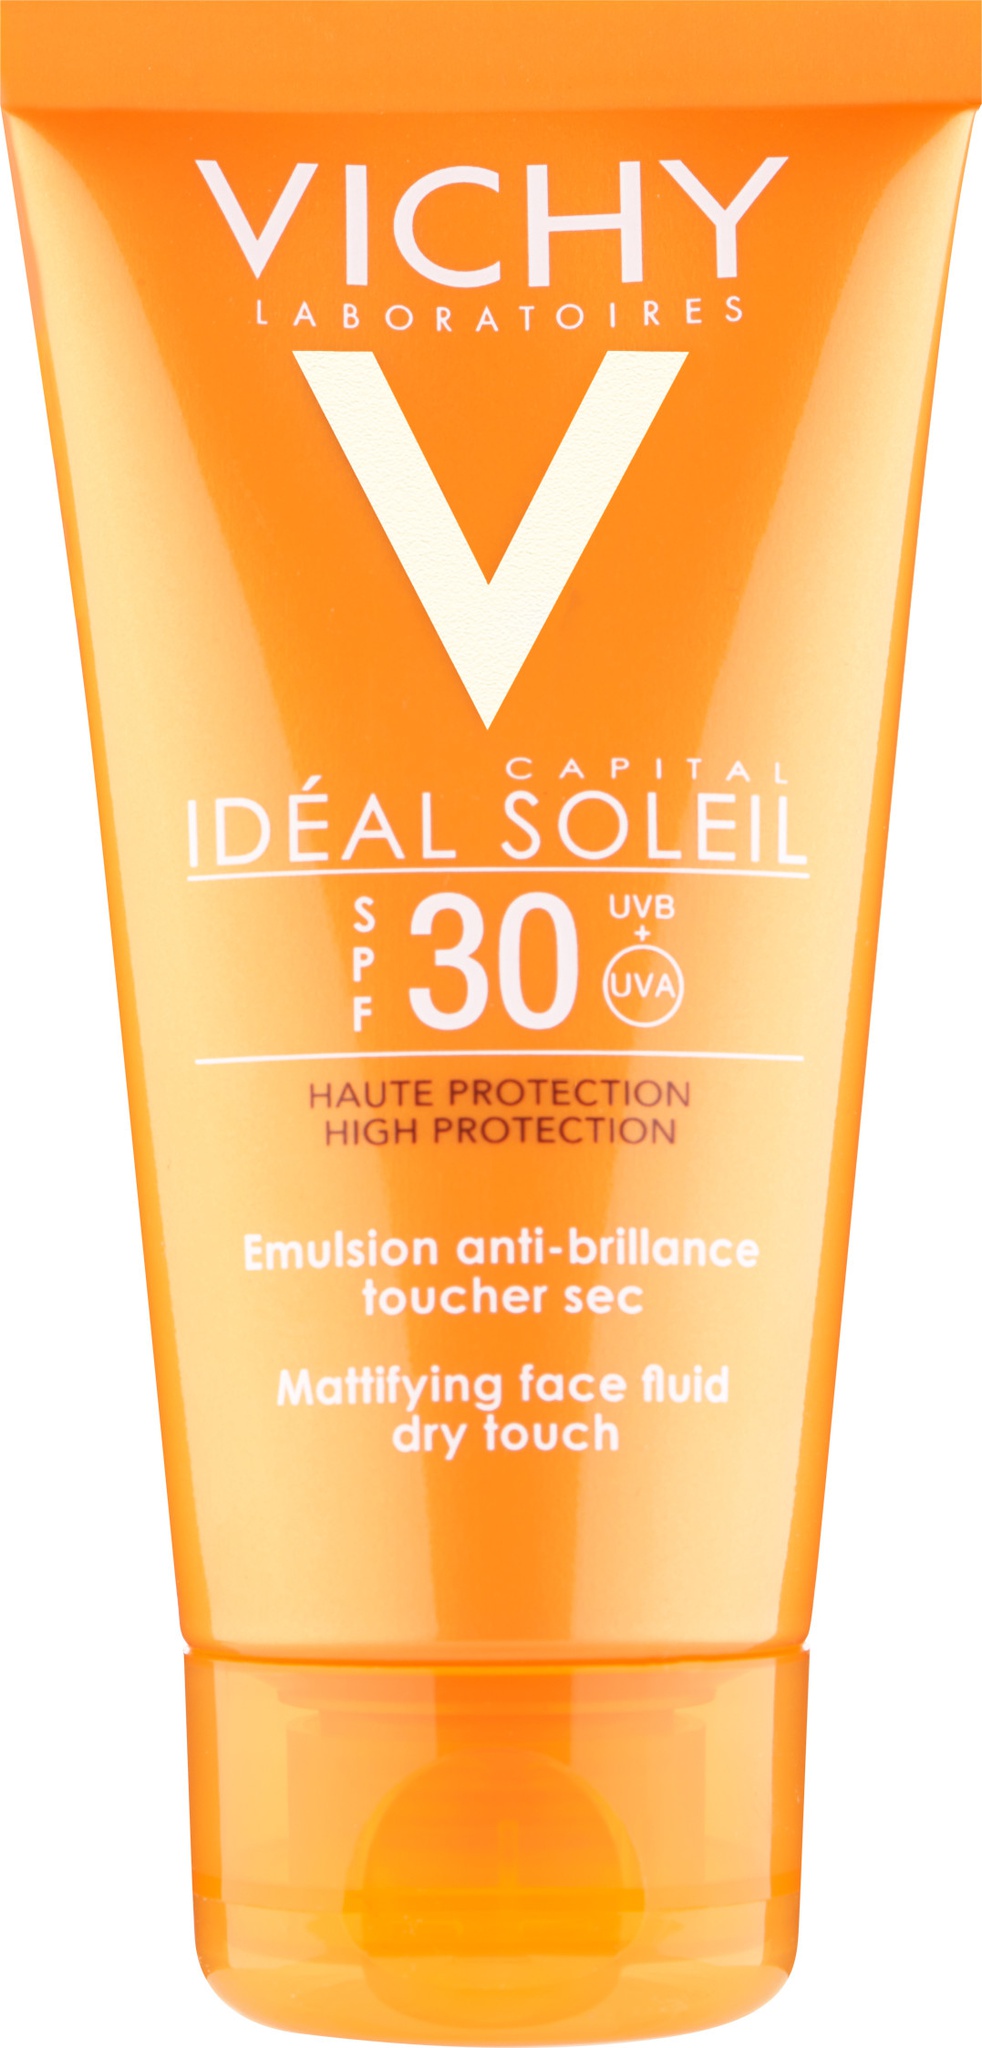 Vichy Ideal Soleil Mattifying Face Fluid Dry Touch SPF 30